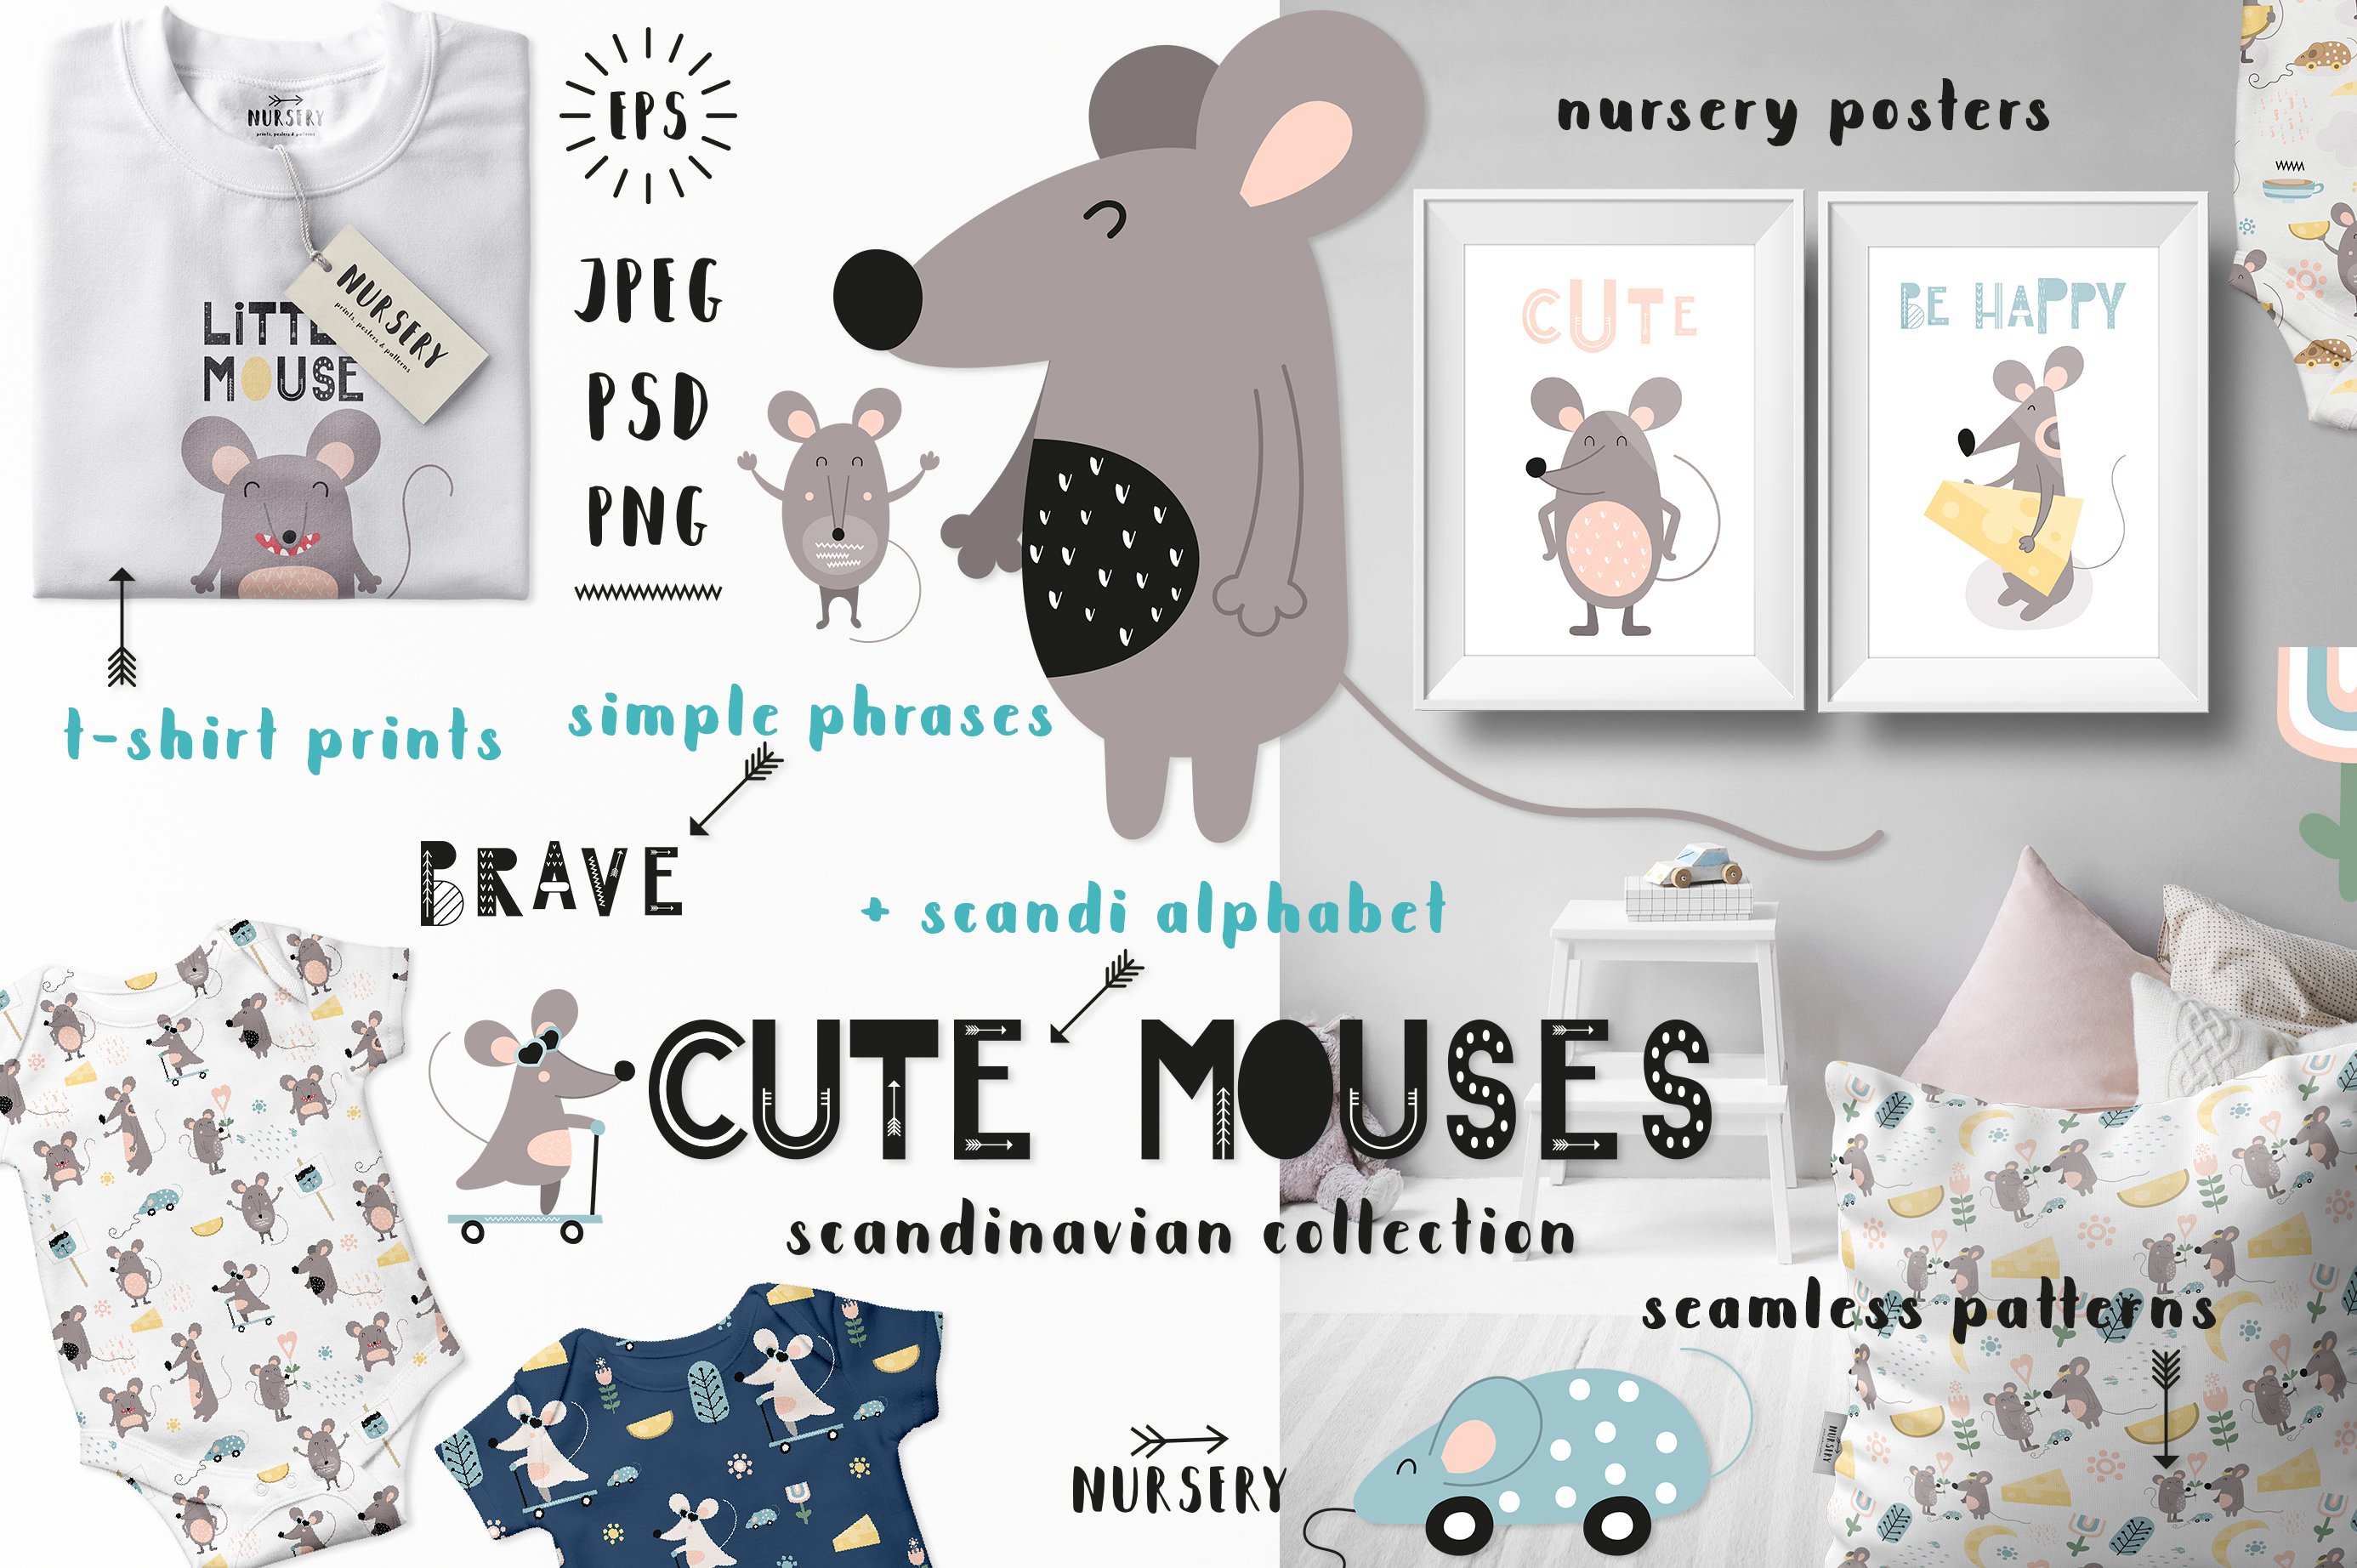 Delicate mouses.